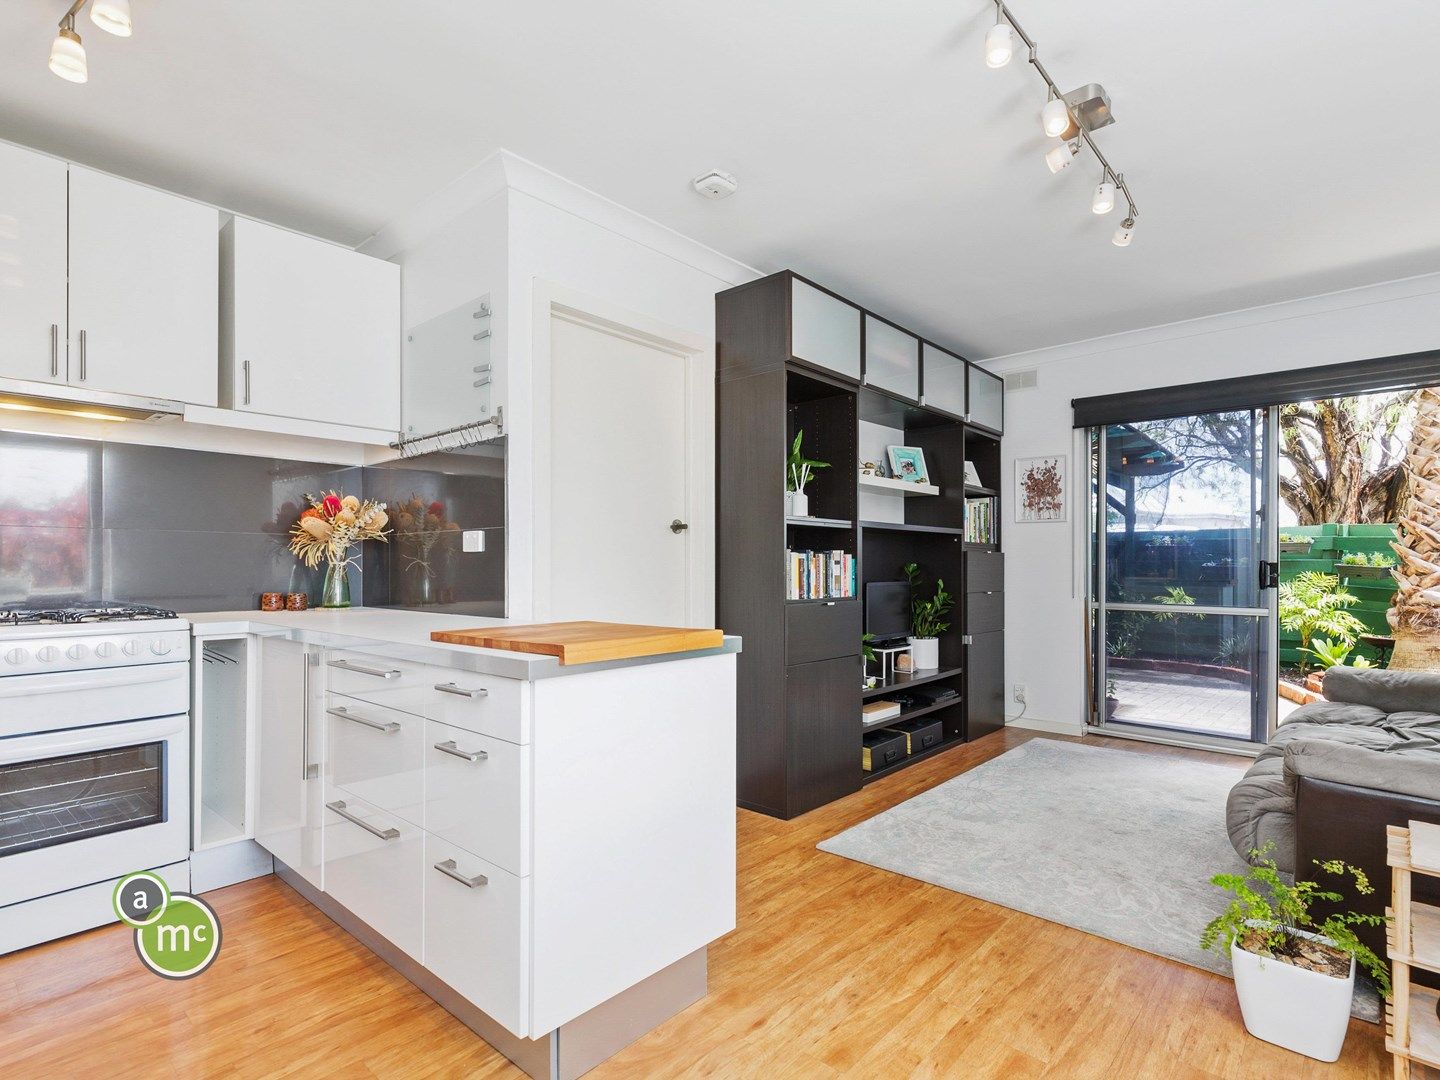 1 bedrooms Apartment / Unit / Flat in 11/11 Stirling Road CLAREMONT WA, 6010